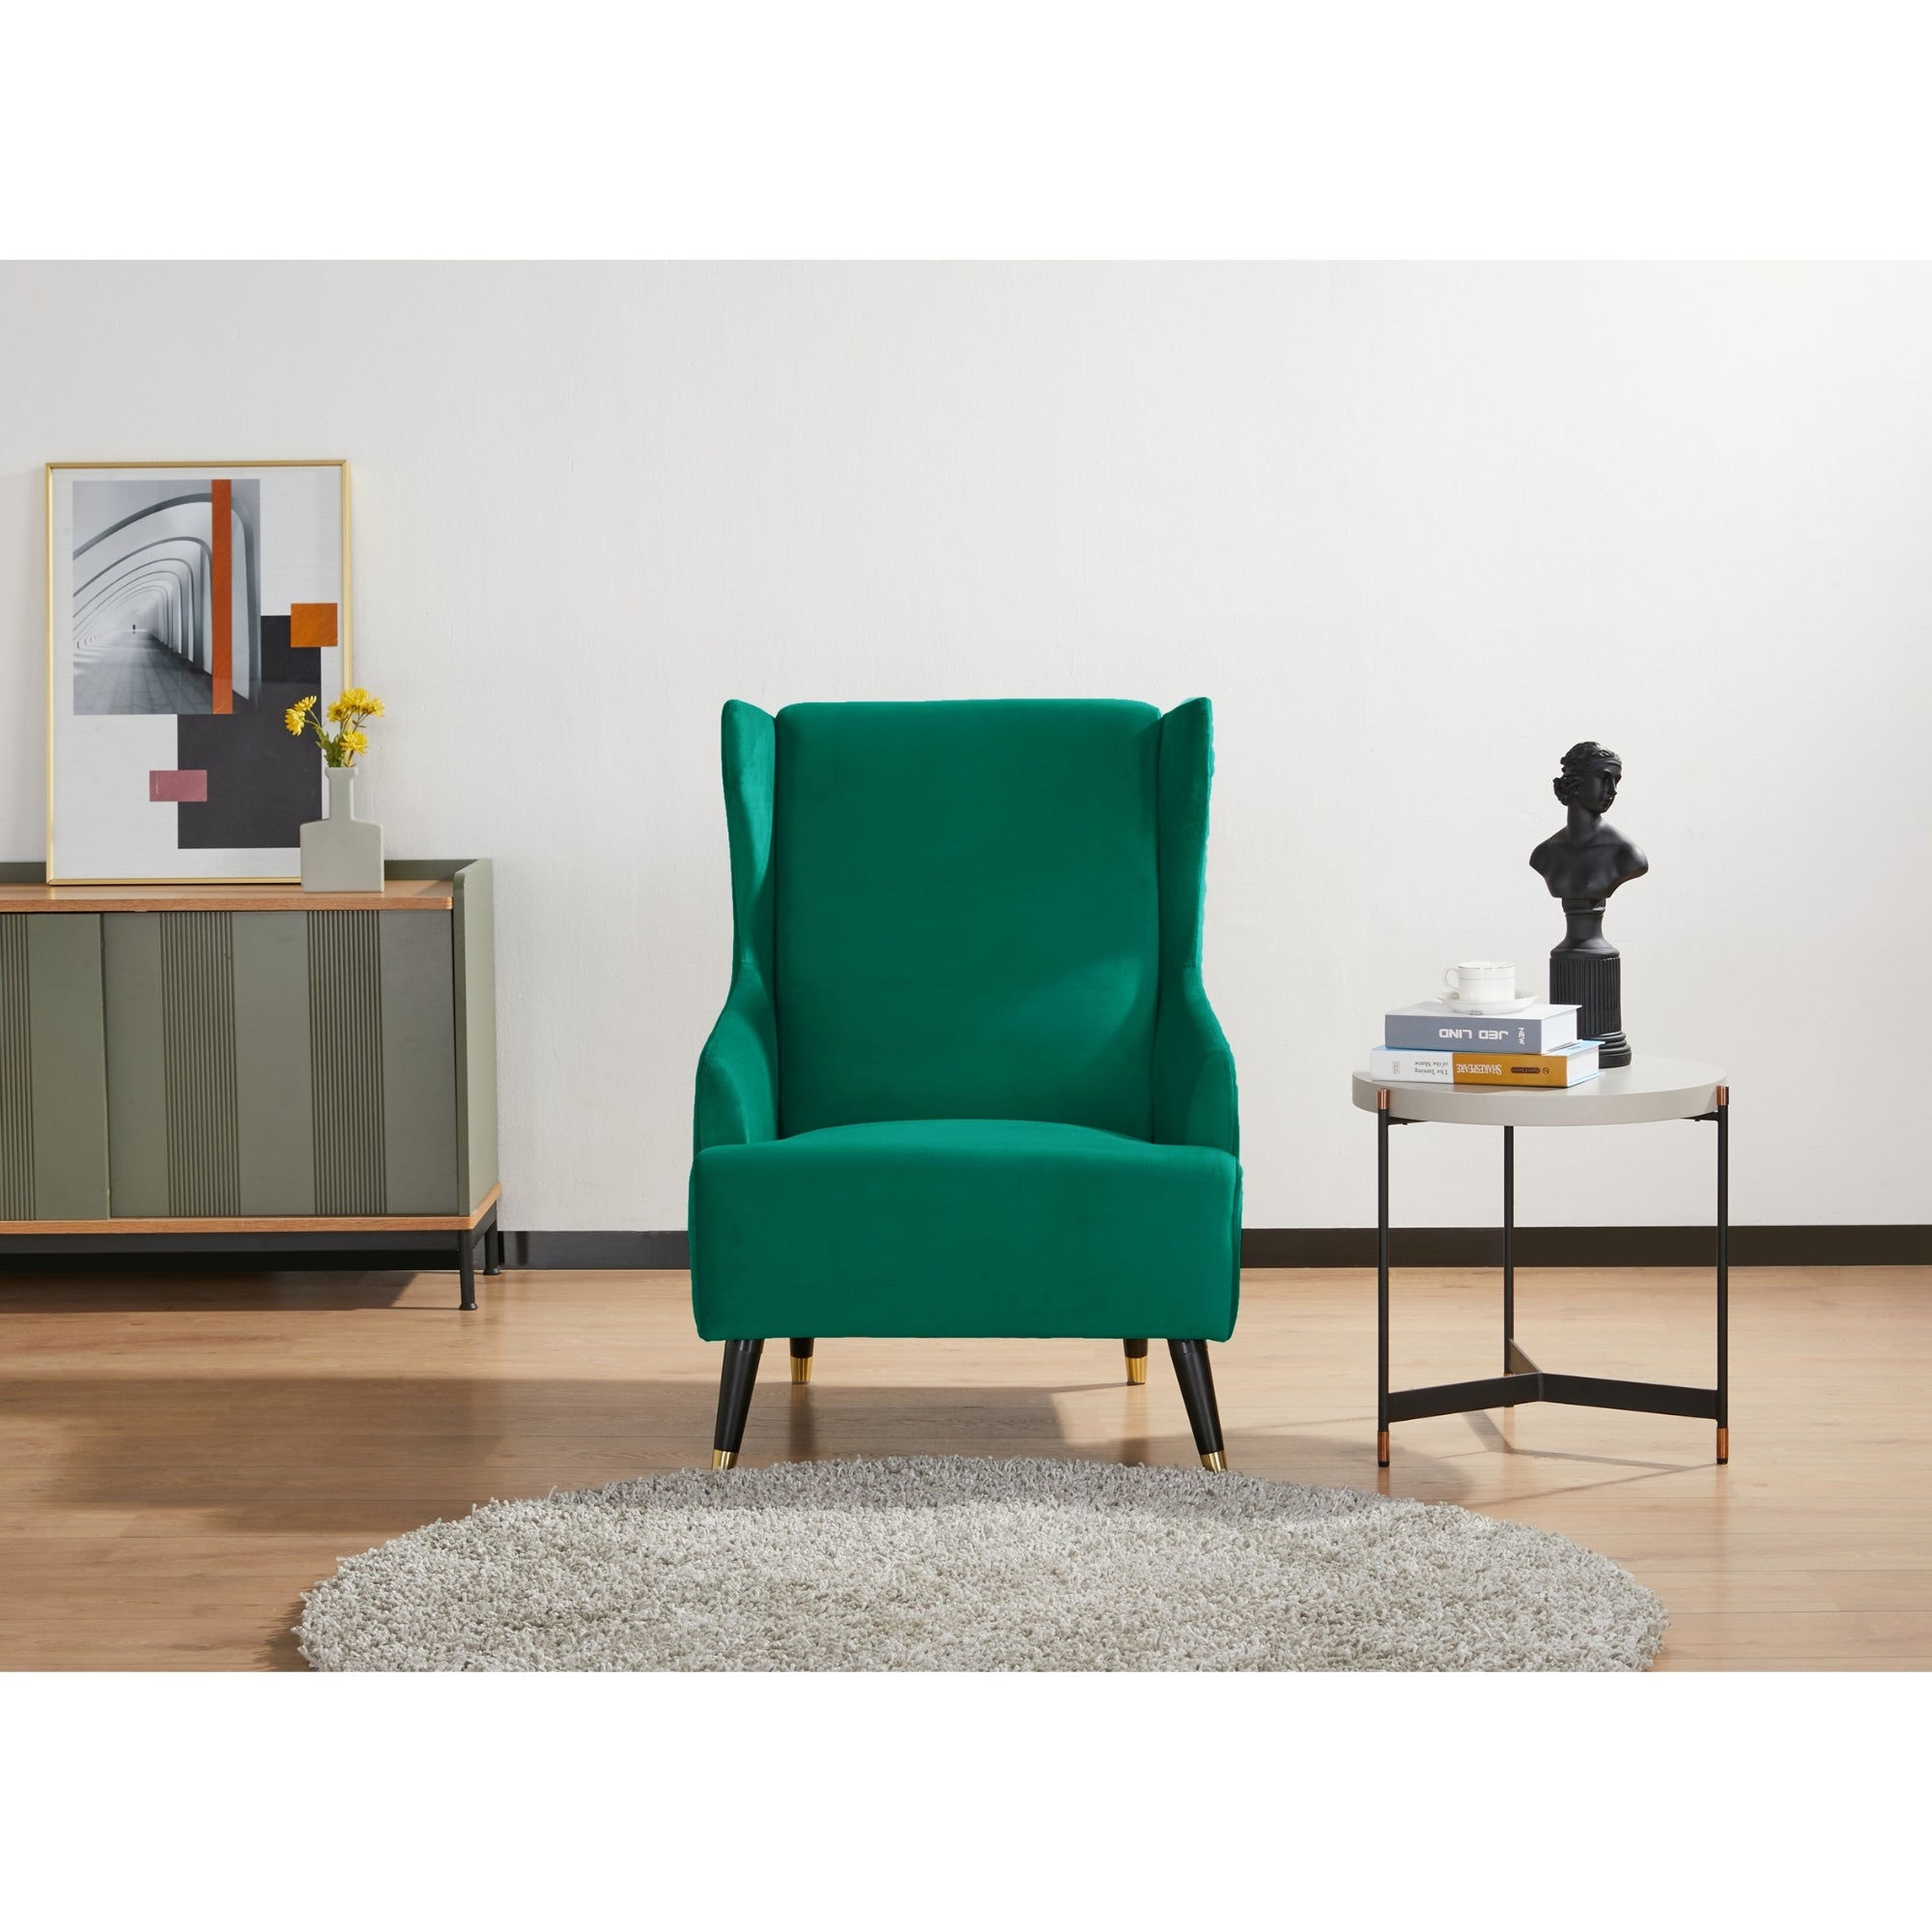 Plush Green Accent Sofa Arm Chair with S Springs Support